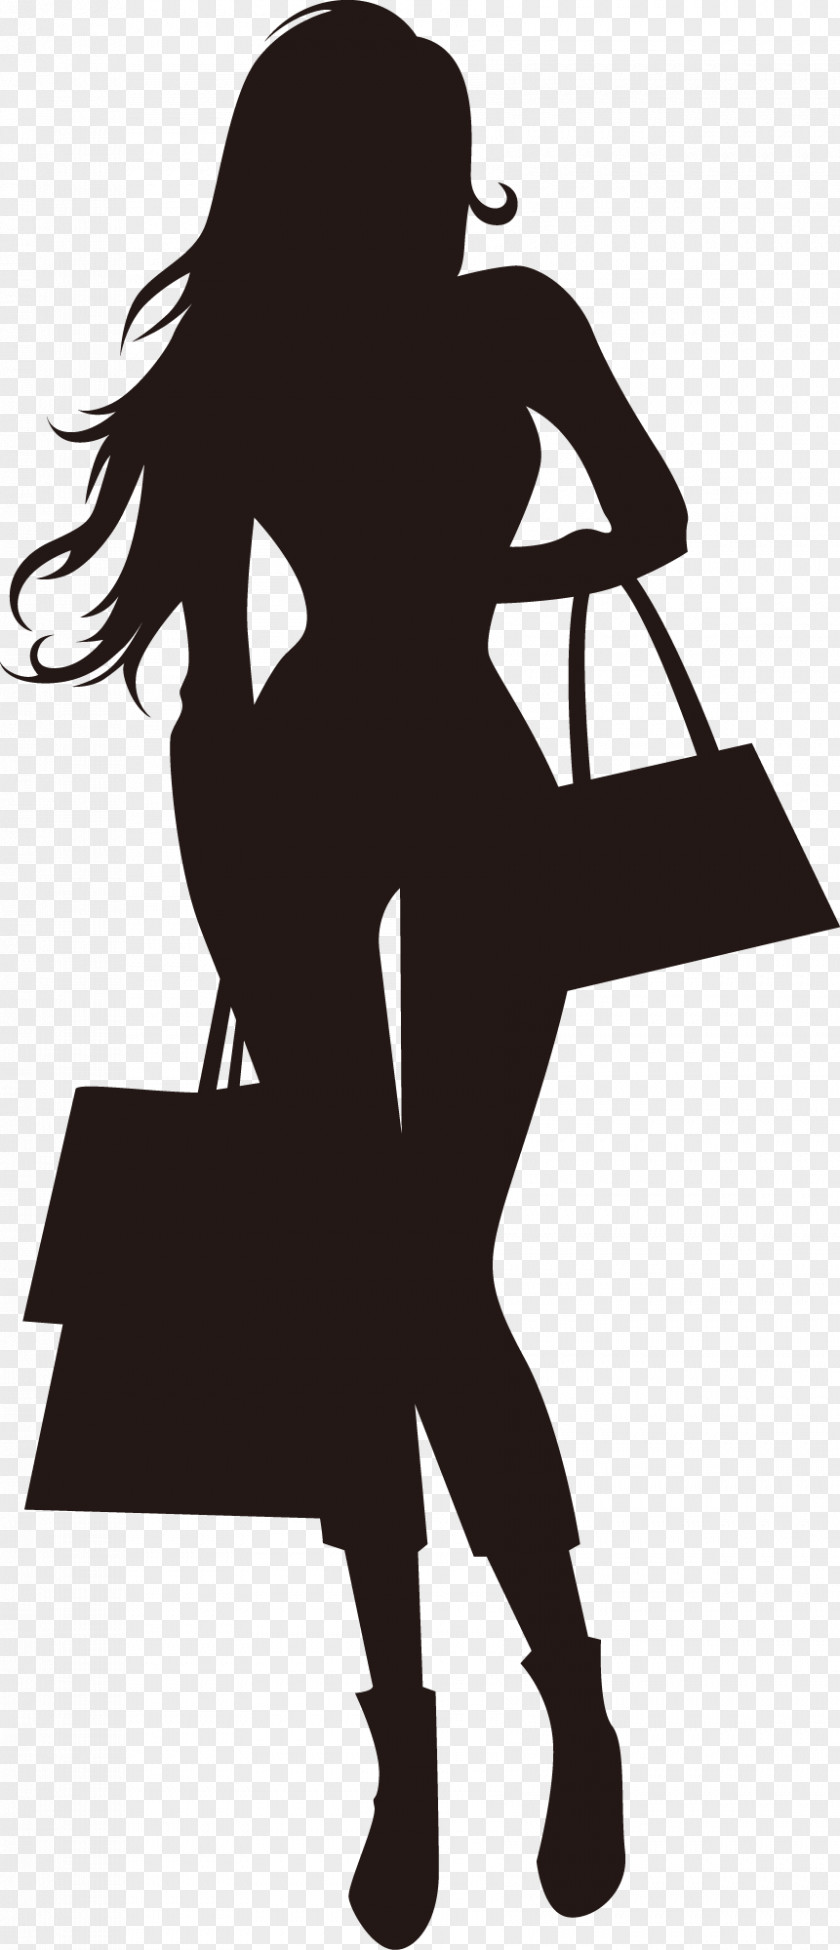 Fashion Silhouette PNG , shopping girl silhouette, silhouette of woman carrying tote bags illustration clipart PNG